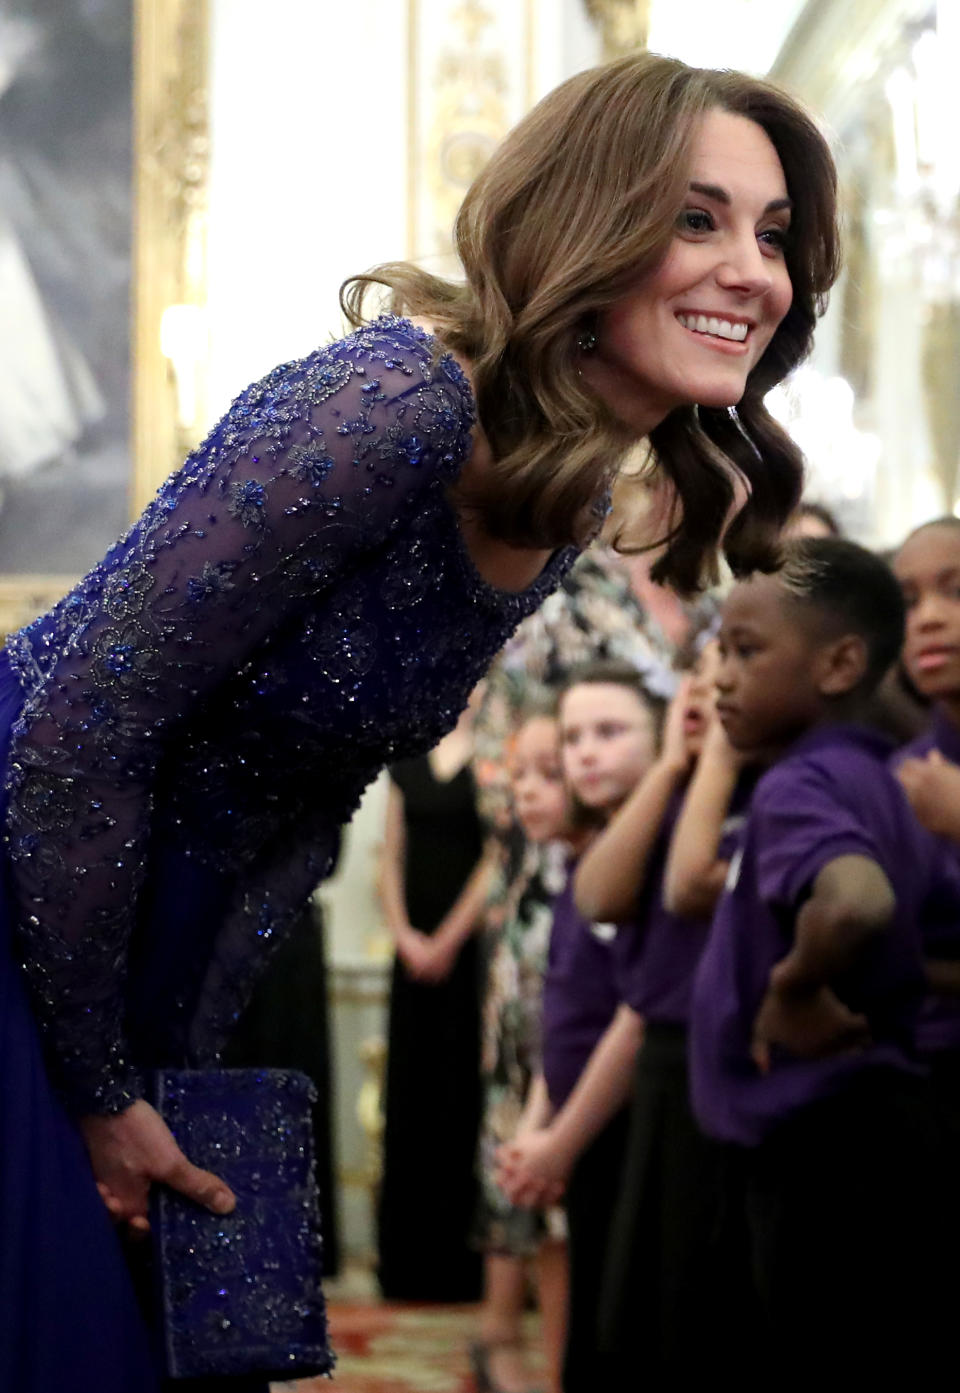 LONDON, ENGLAND - MARCH 09: Catherine, Duchess of Cambridge speaks with a school choir as she hosts a Gala Dinner in celebration of the 25th anniversary of Place2Be at Buckingham Palace on March 09, 2020 in London, England. The Duchess is Patron of Place2Be, which provides emotional support at an early age and believes no child should face mental health difficulties alone. (Photo by Chris Jackson - WPA Pool/Getty Images)